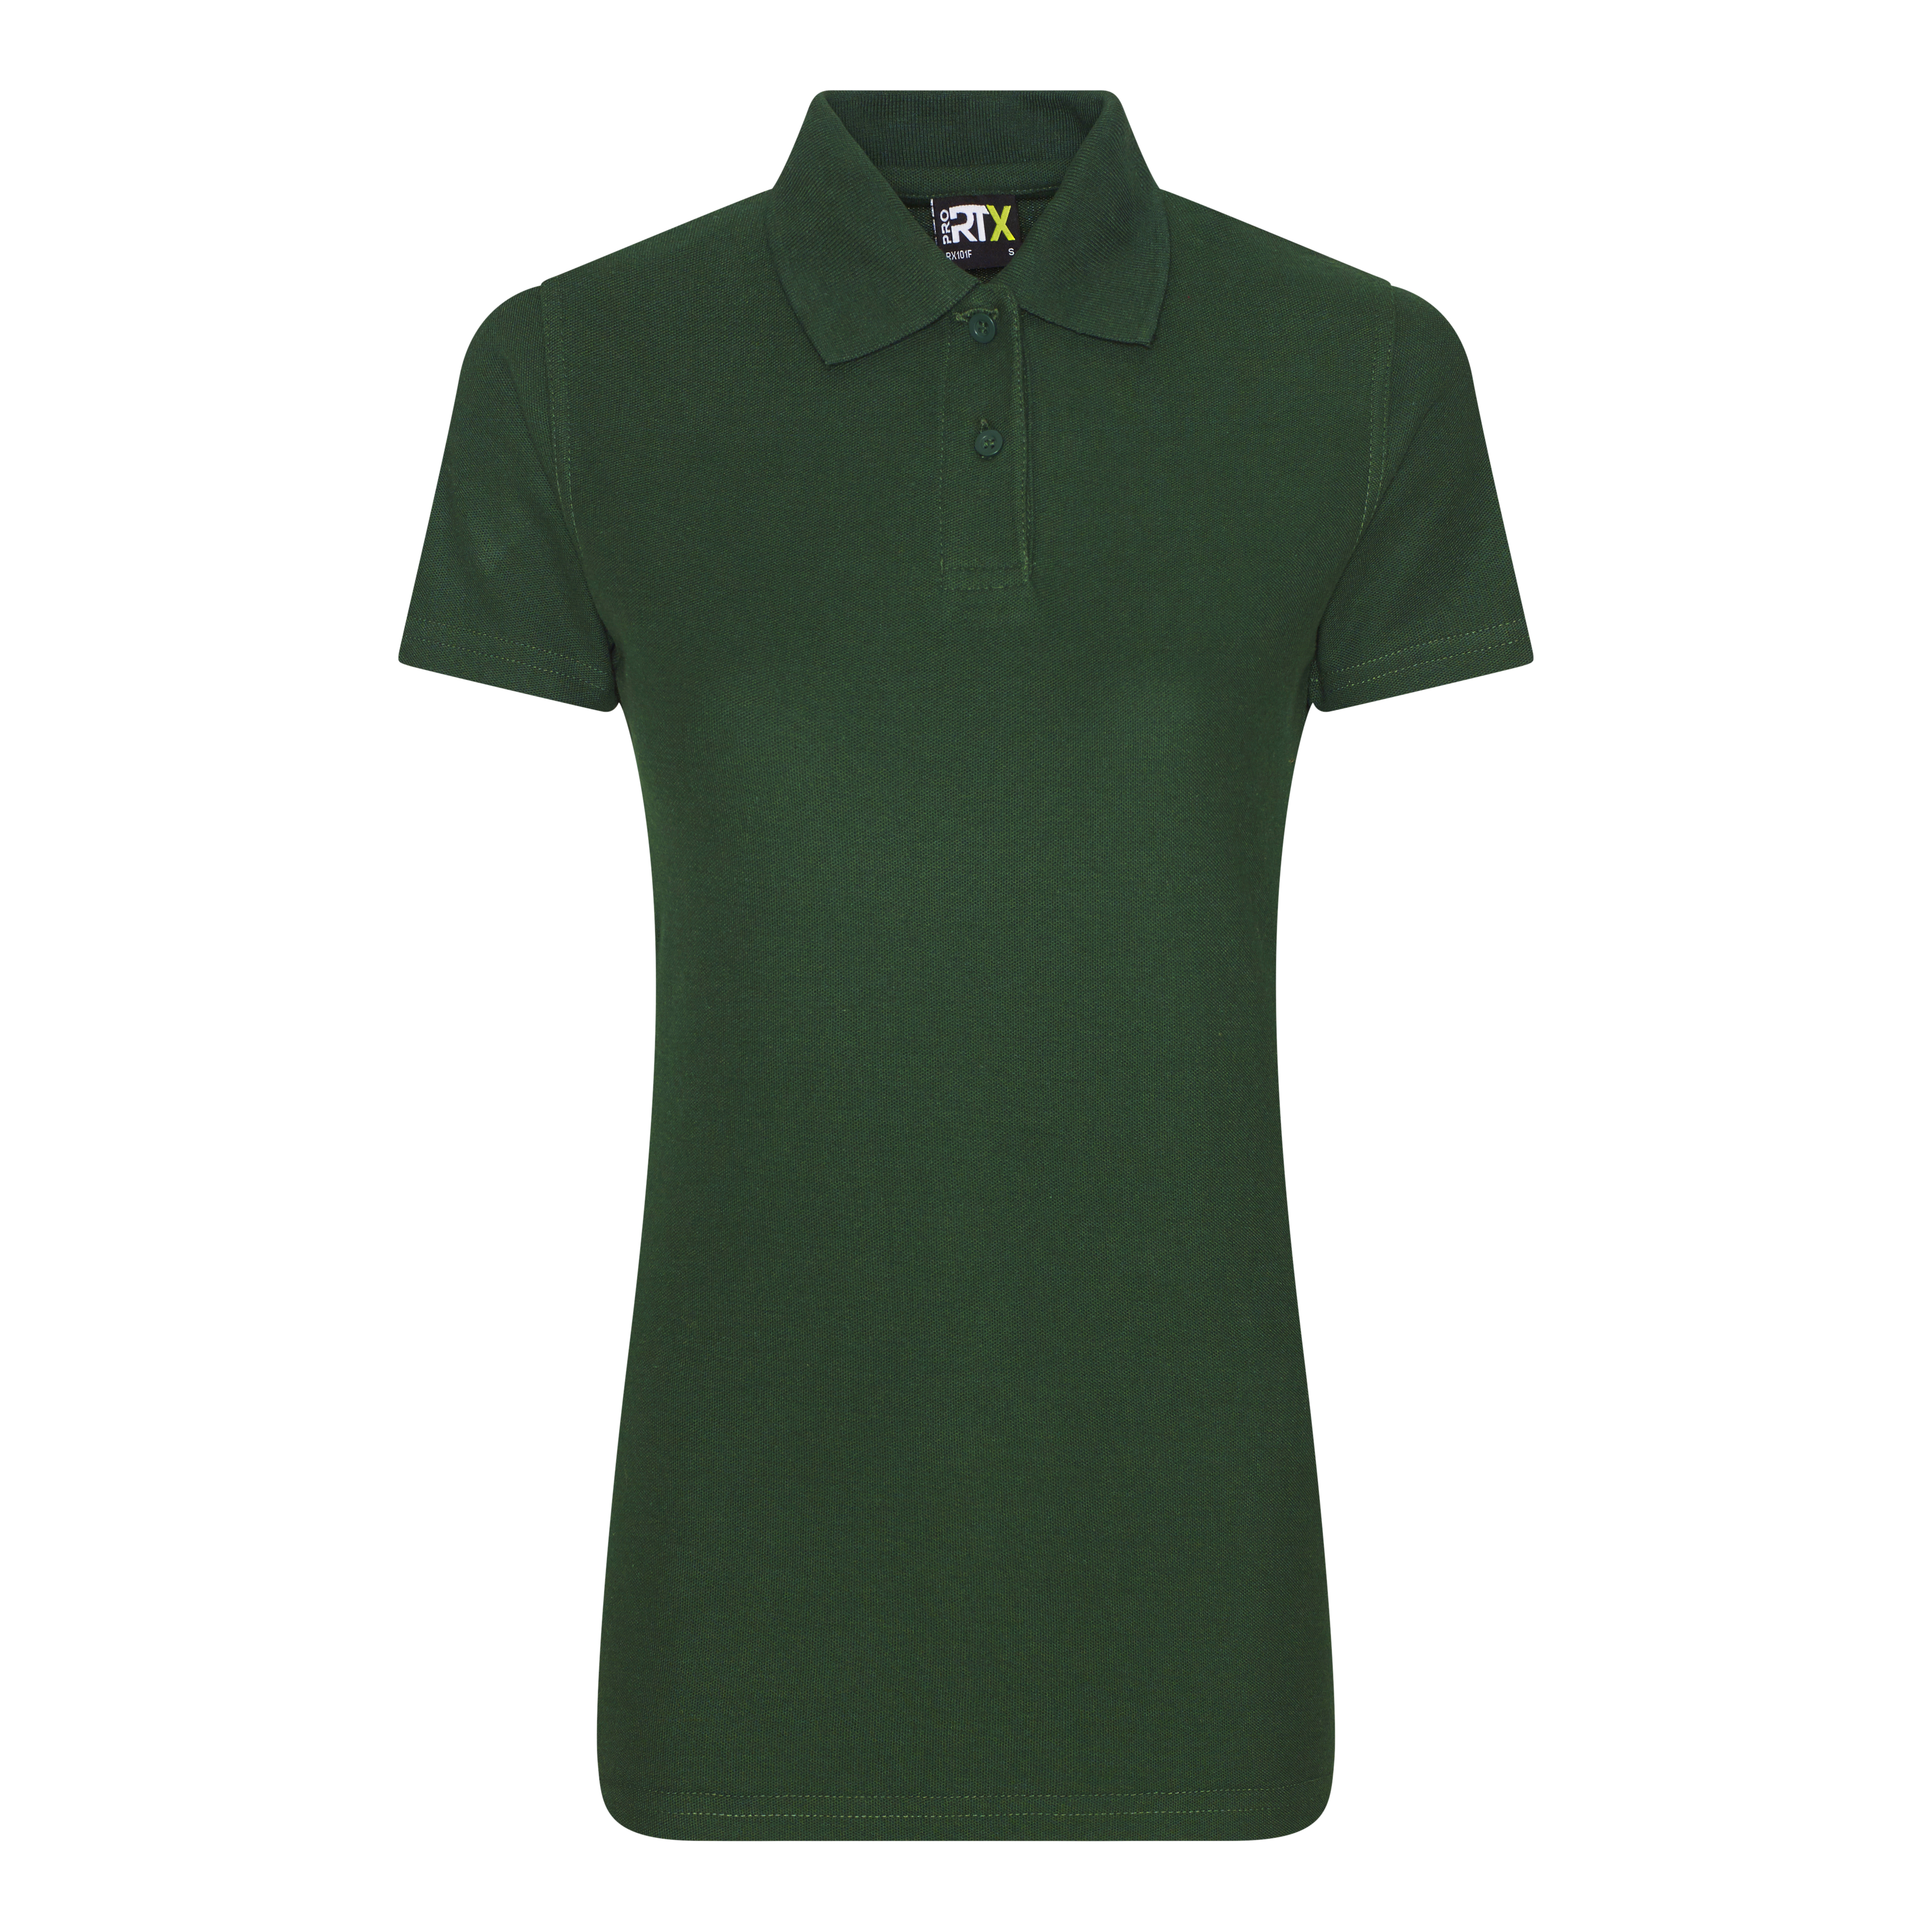 ax-httpswebsystems.s3.amazonaws.comtmp_for_downloadpro-rtx-ladies-pro-polo-bottle-green.jpg